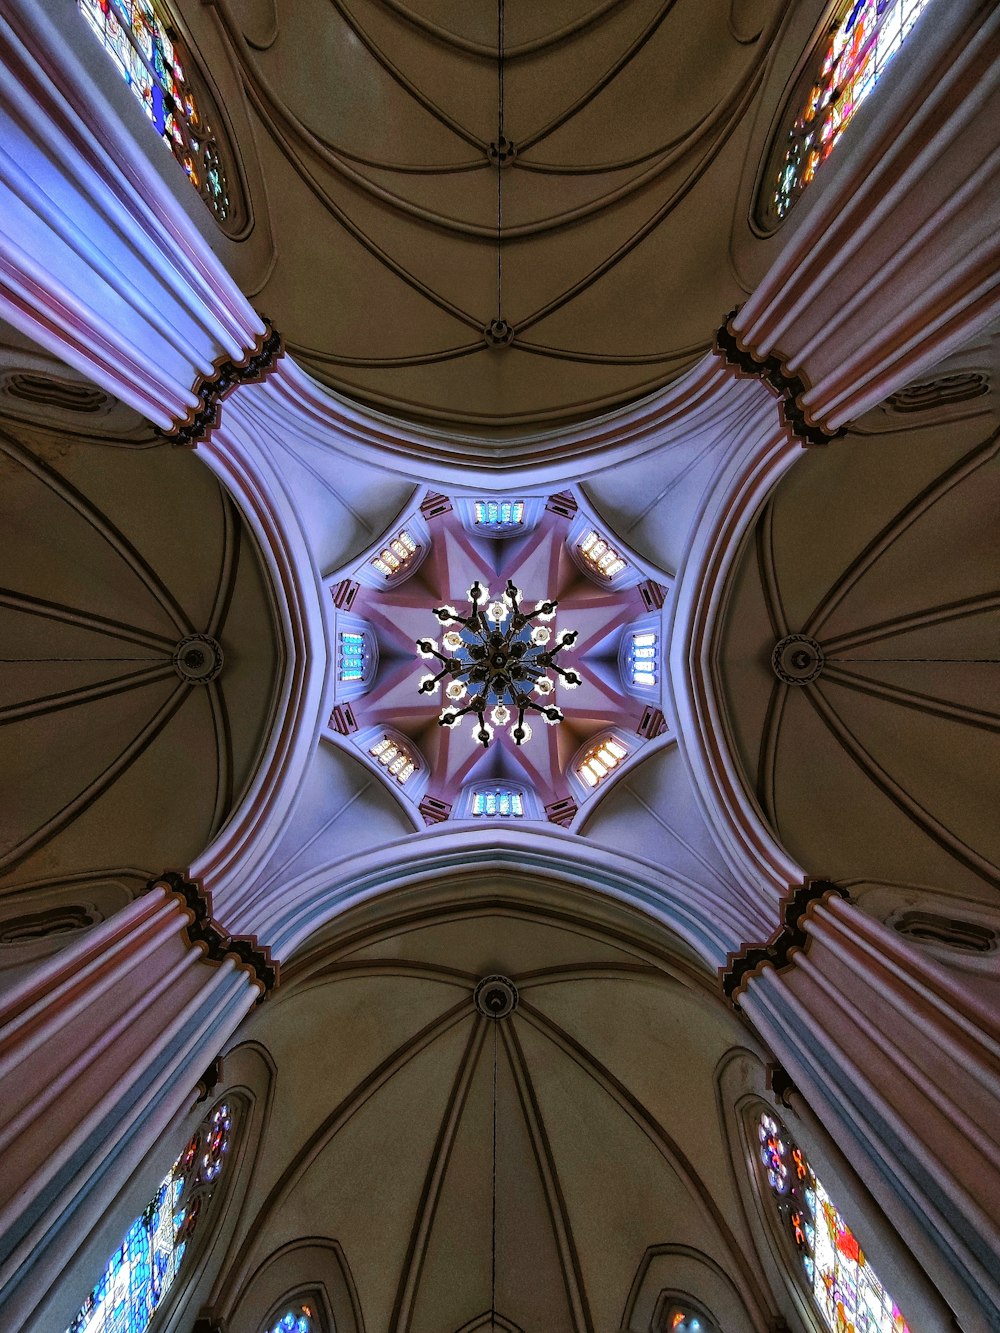 a view of the ceiling of a cathedral with stained glass windows